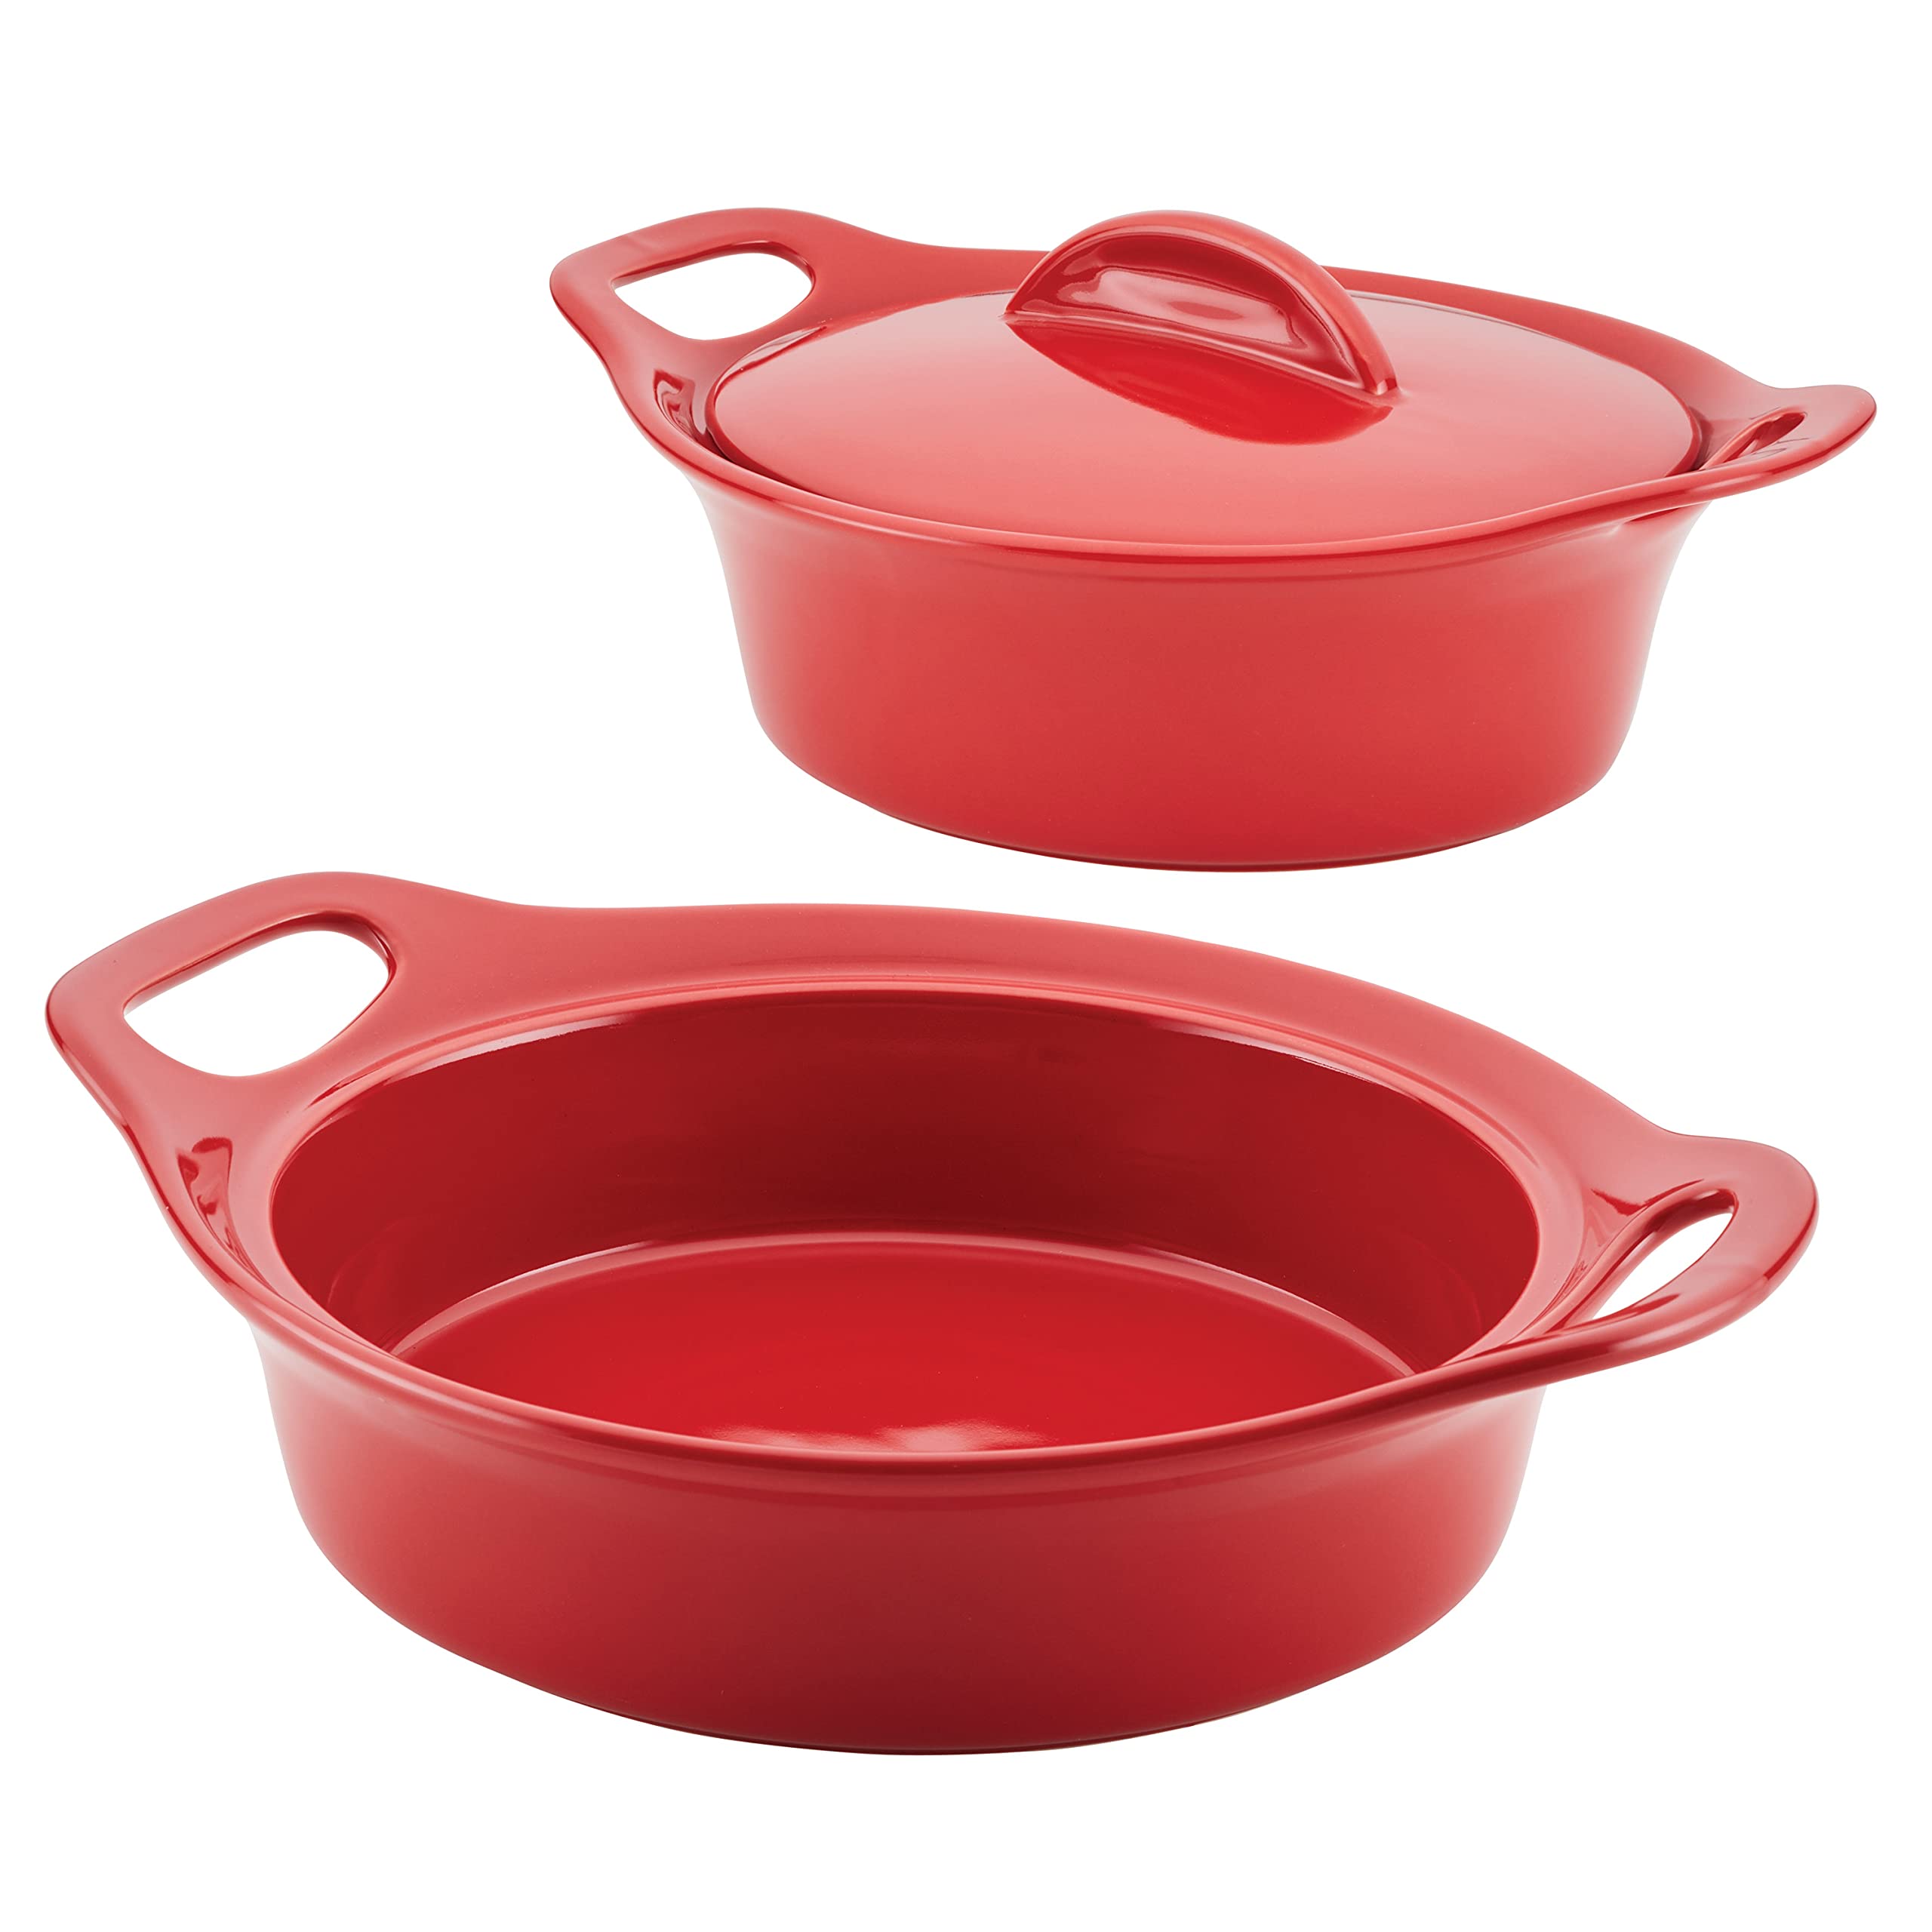 Rachael Ray Solid Glaze Ceramics Casserole Bakers/Baking Dish with Shared Lid Set, 3 Piece, Red